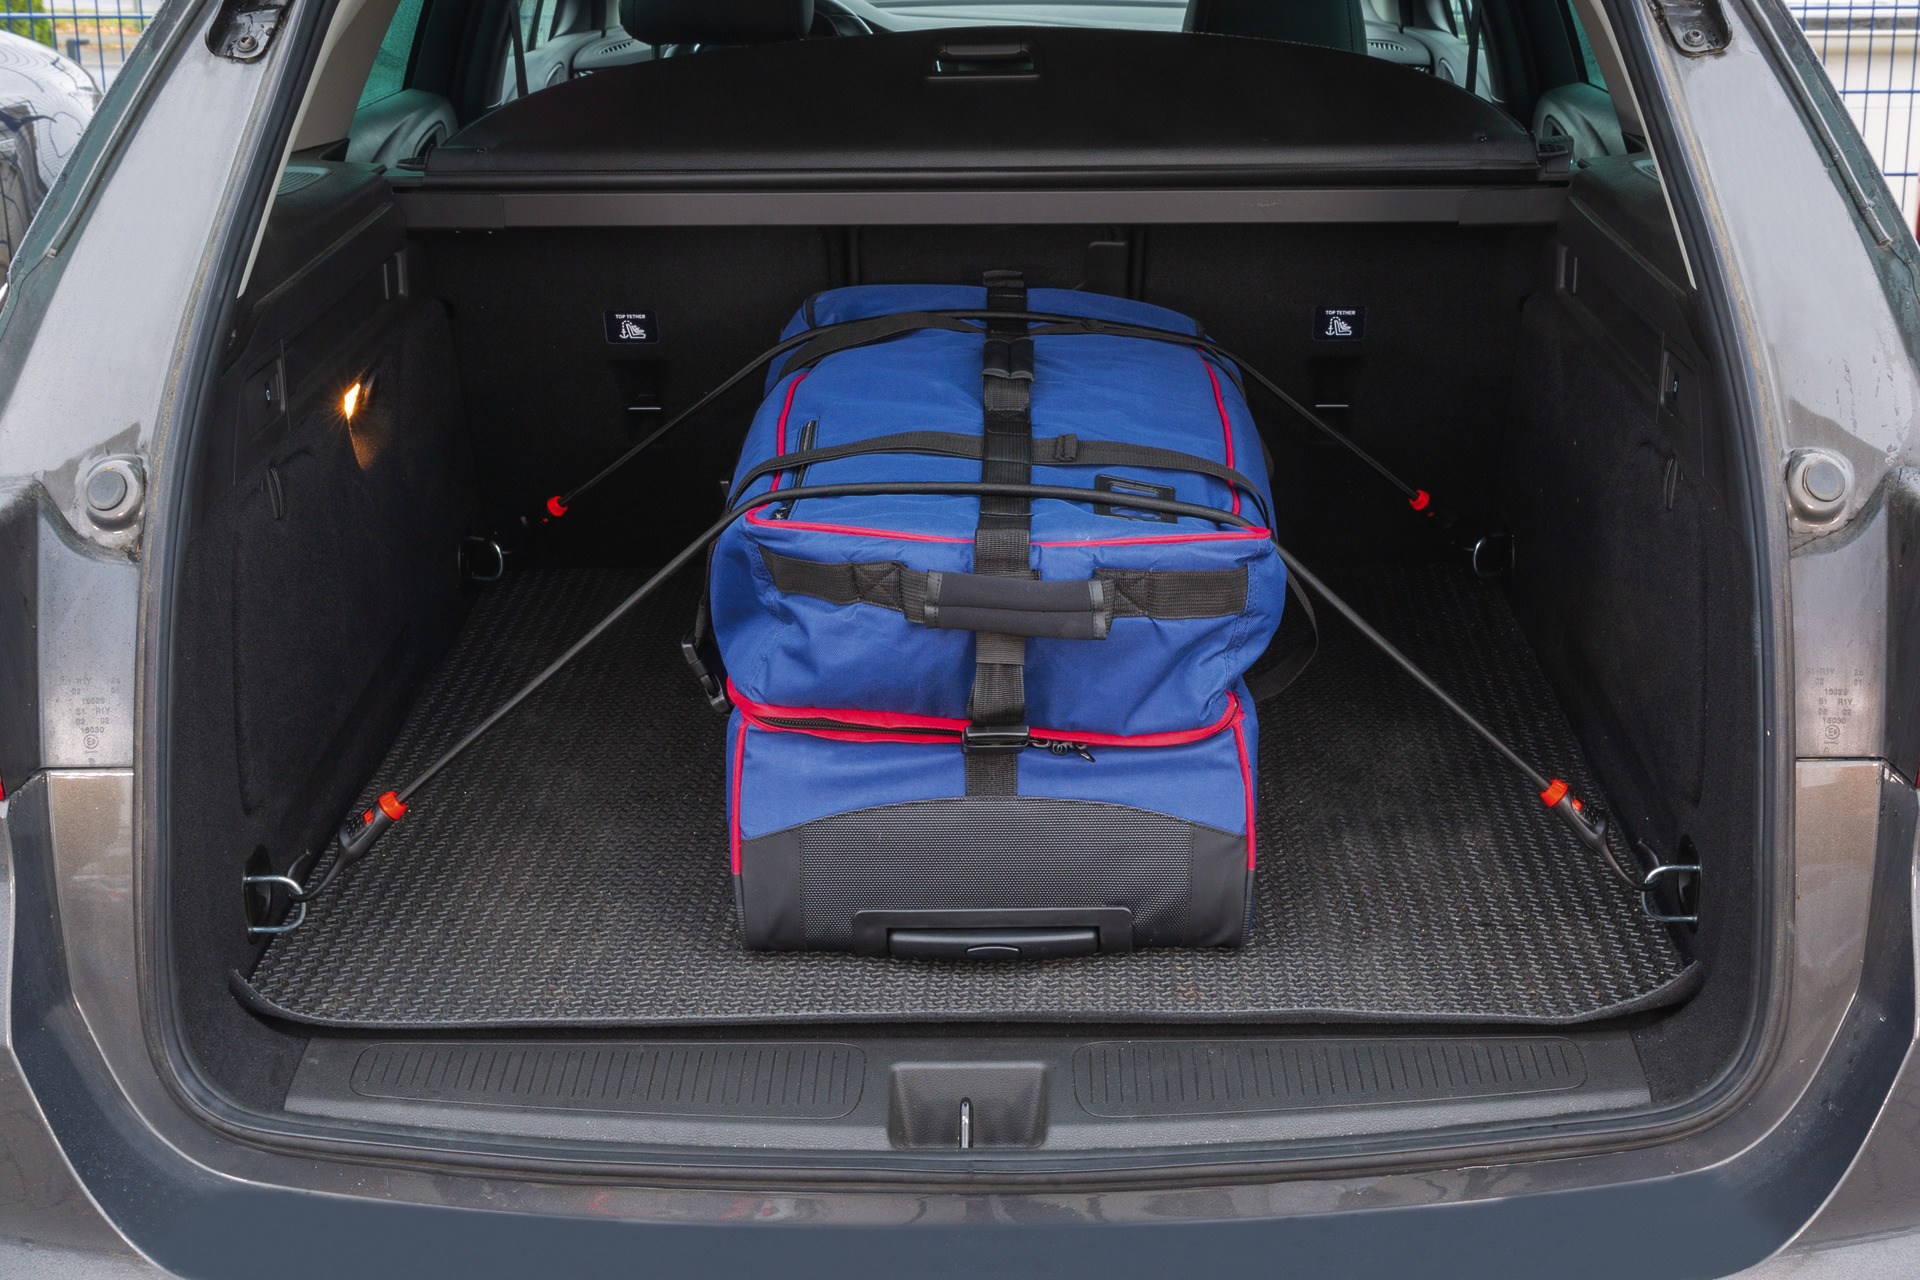 Application example – bungee rope in the car